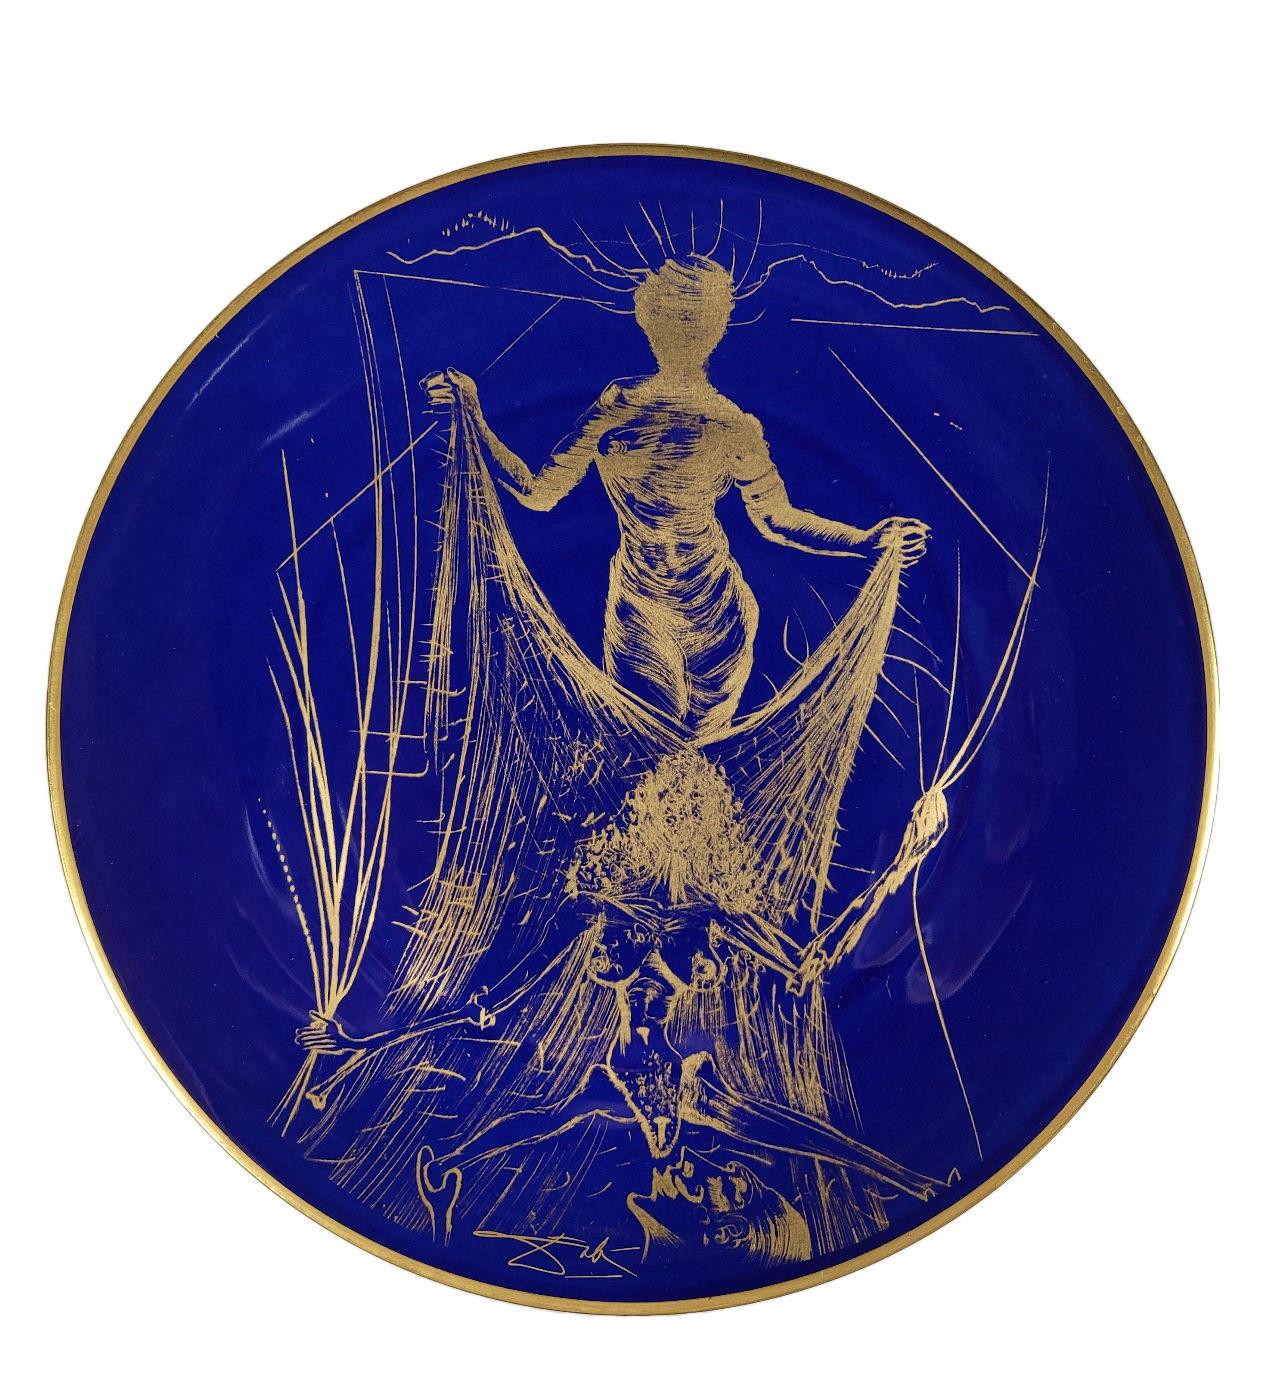 (after) Salvador Dali Abstract Sculpture - “Woman with Veil” exclusive Dali and Raynaud & Co. Ltd. Ed. Porcelain Plate 